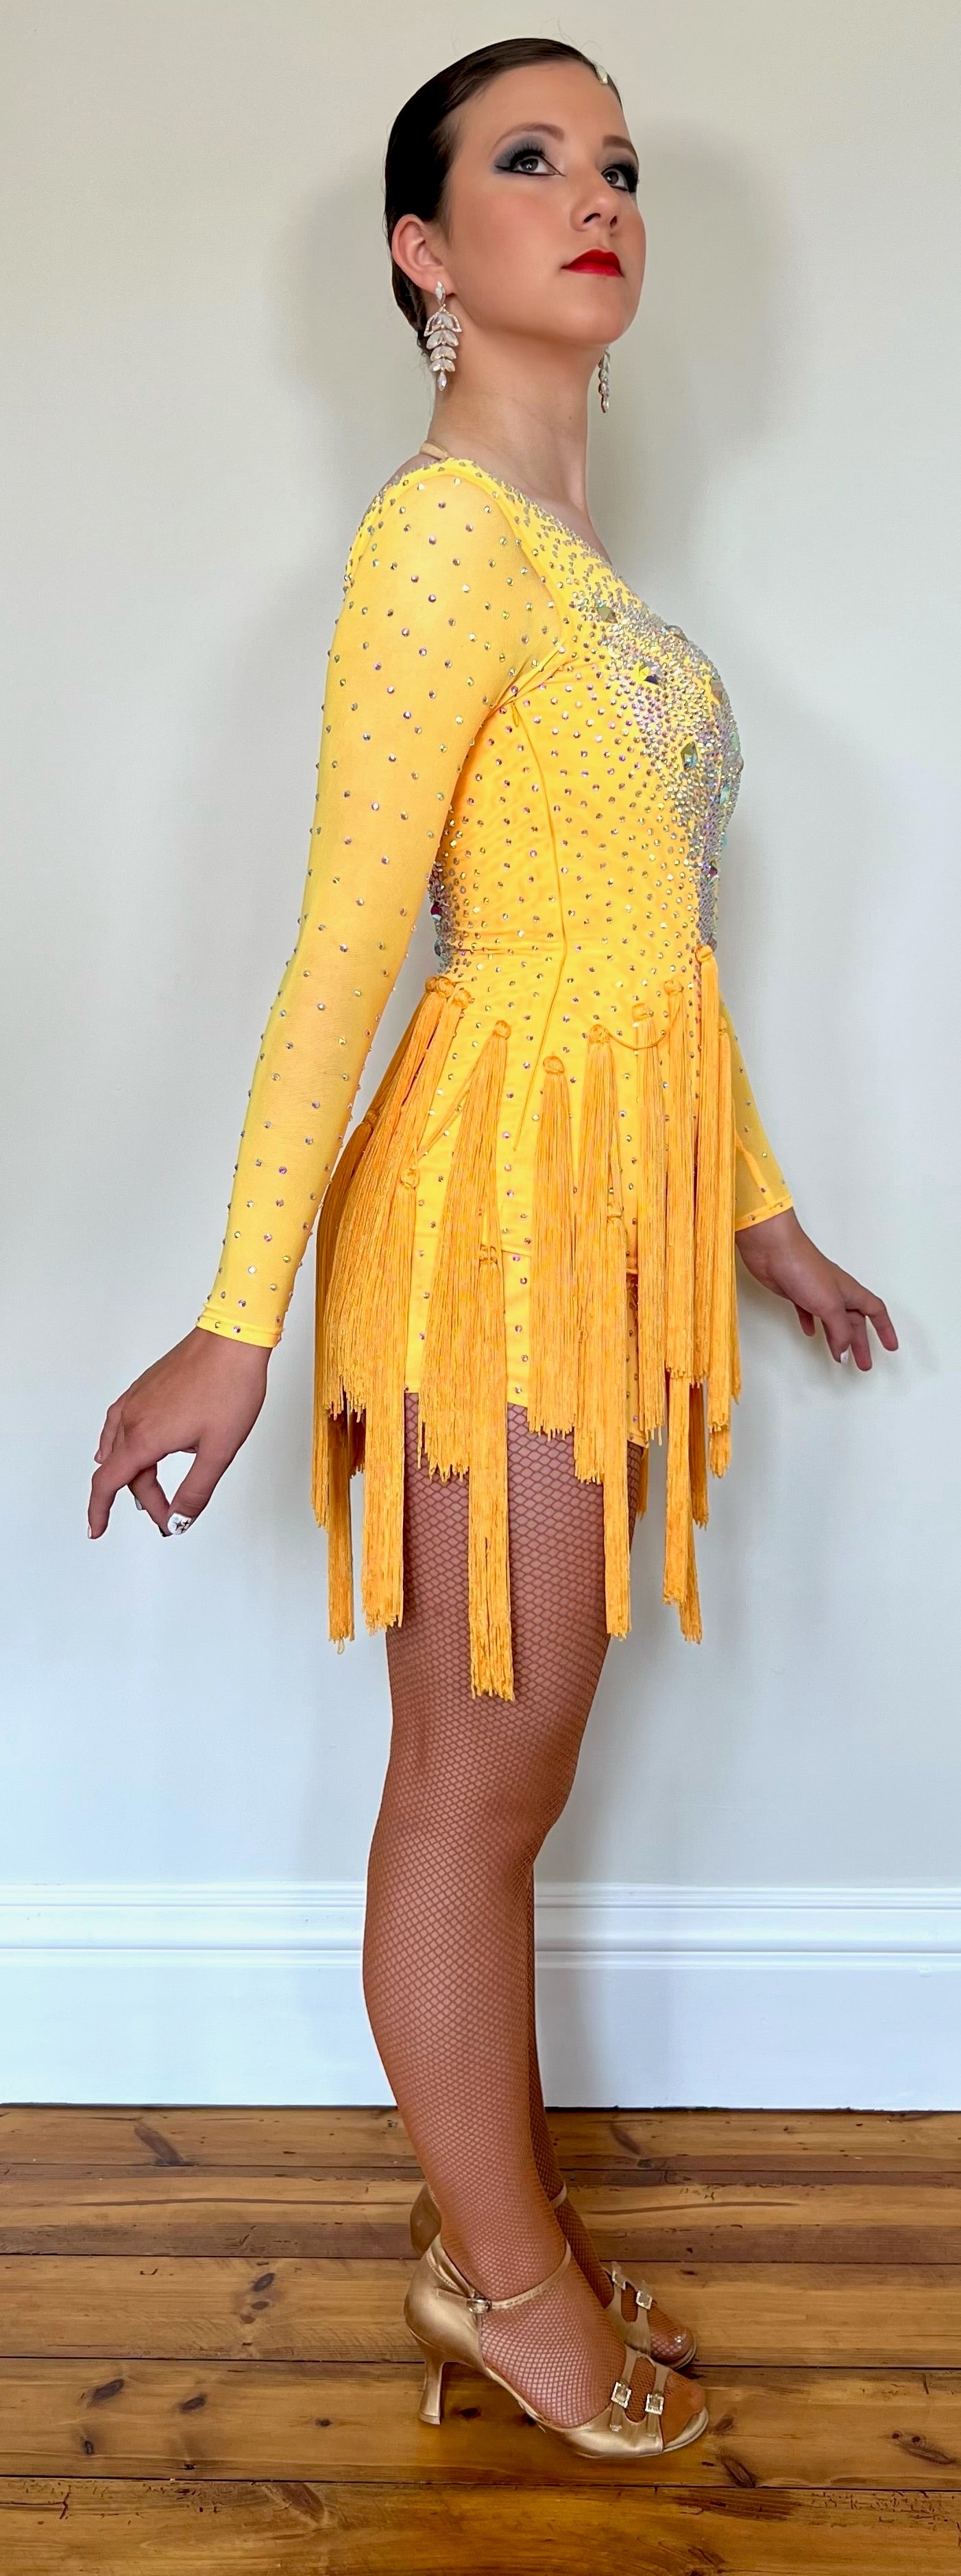 021 Golden Yellow tasseled skirt Latin dress. Decorated in AB with stoned sleeves.